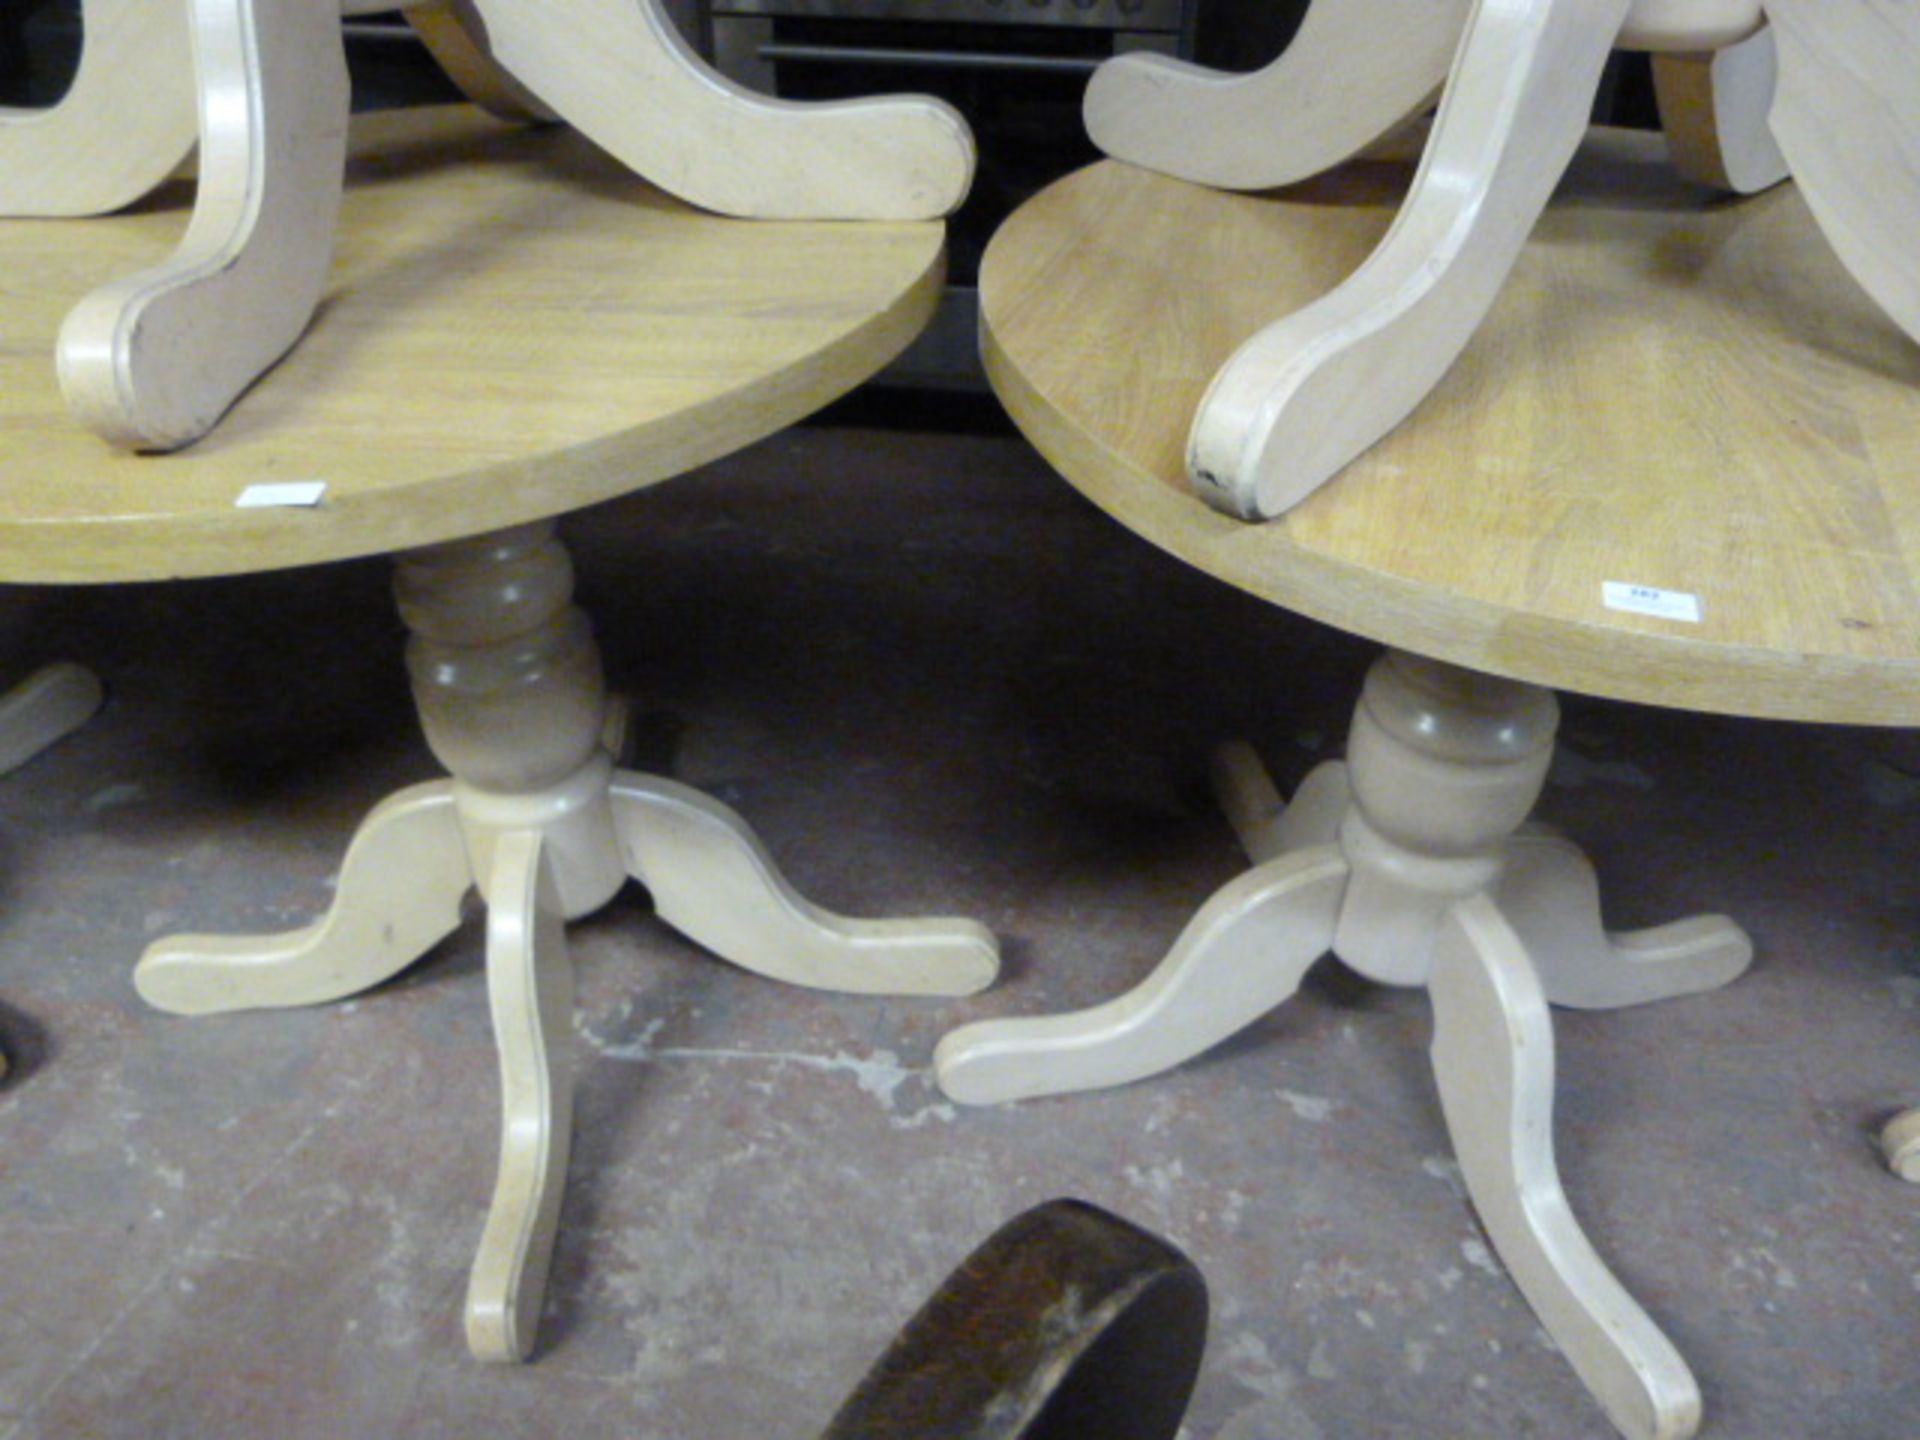 Two Circular Oak Cafe Tables on Pedestal Bases